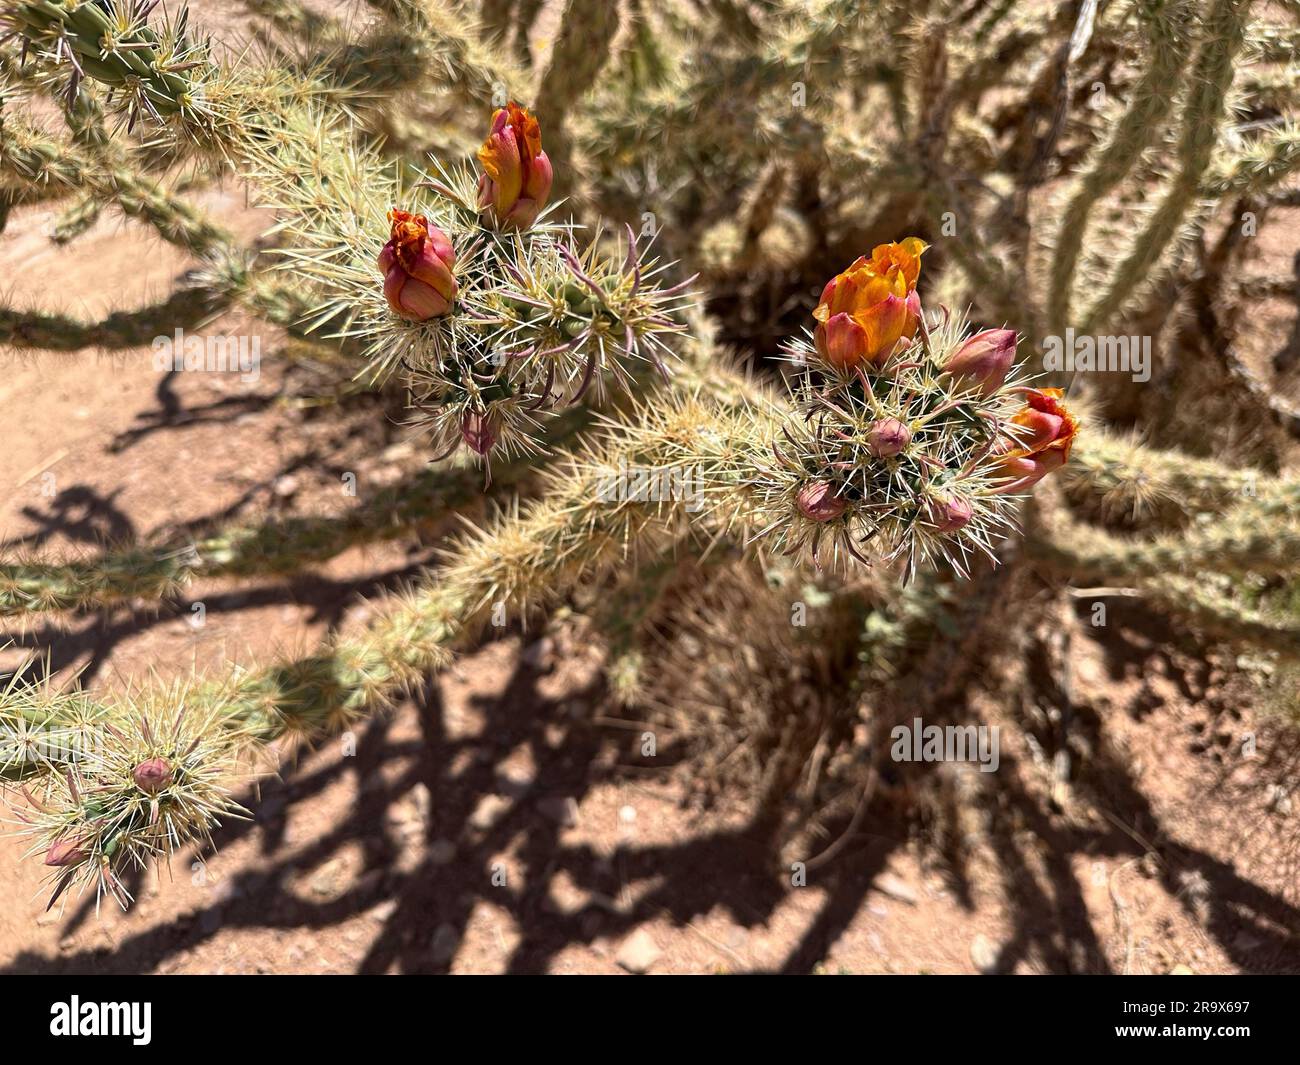 A beautiful cactus plant with flowers against a backdrop of dirt ground Stock Photo